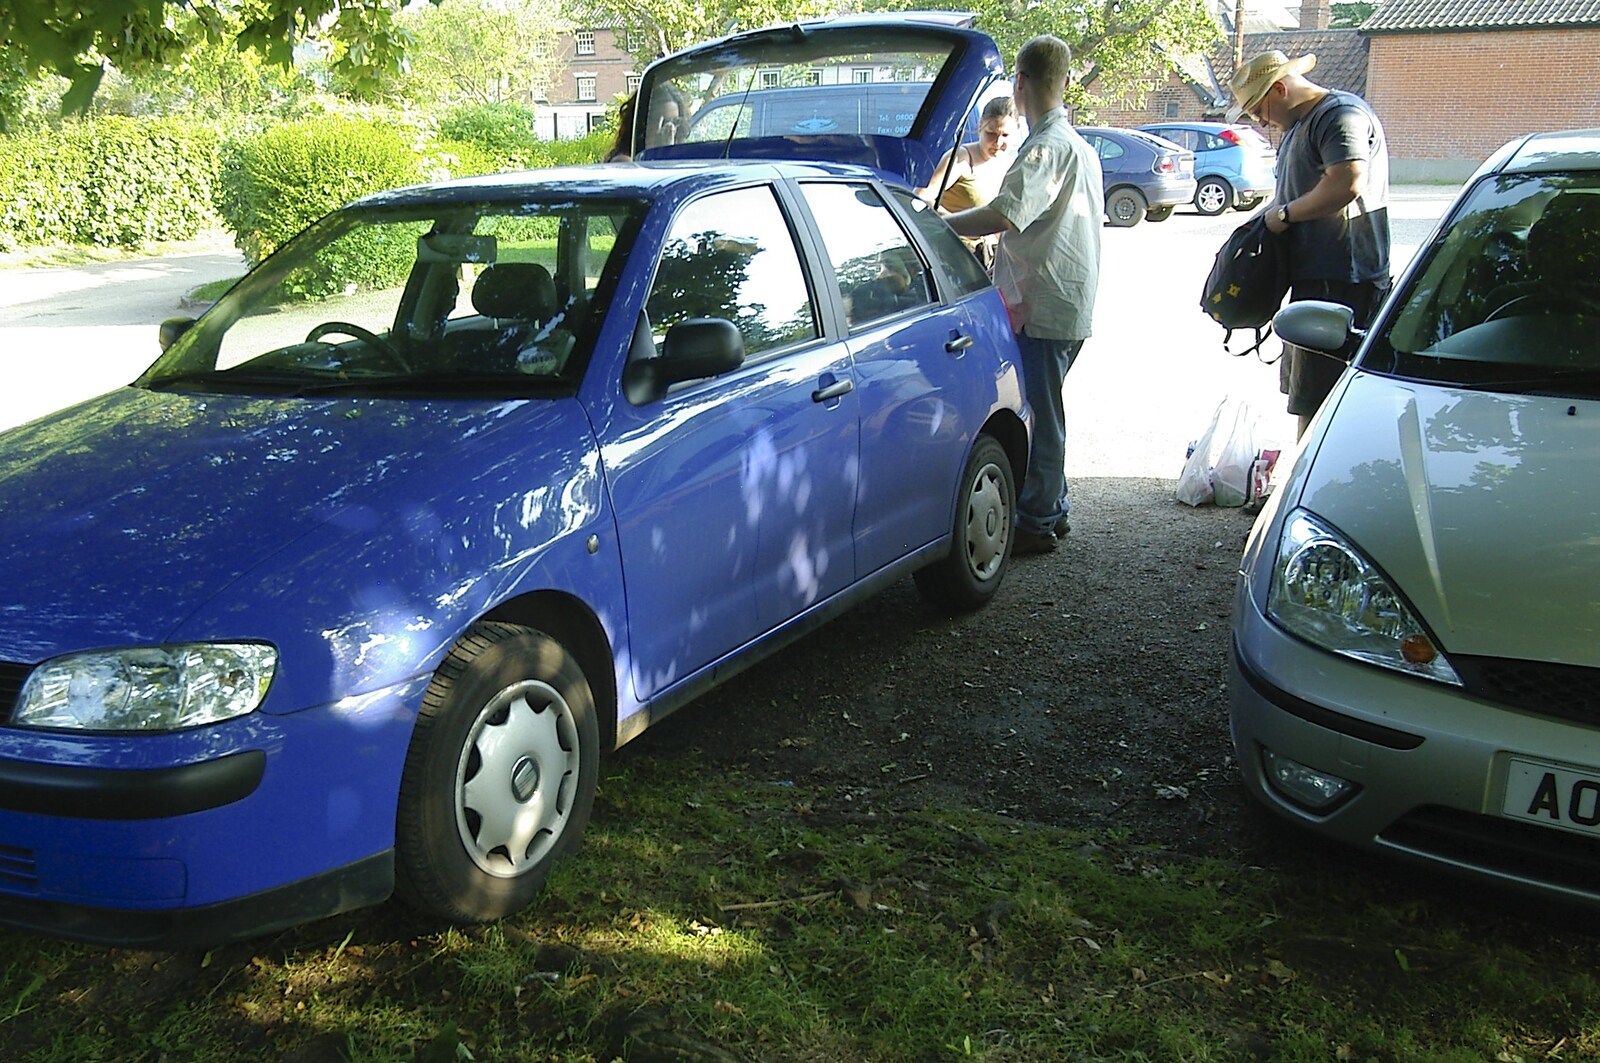 The cars are loaded up from A Picnic by the Castle on a Hill, Framlingham, Suffolk - 17th June 2006